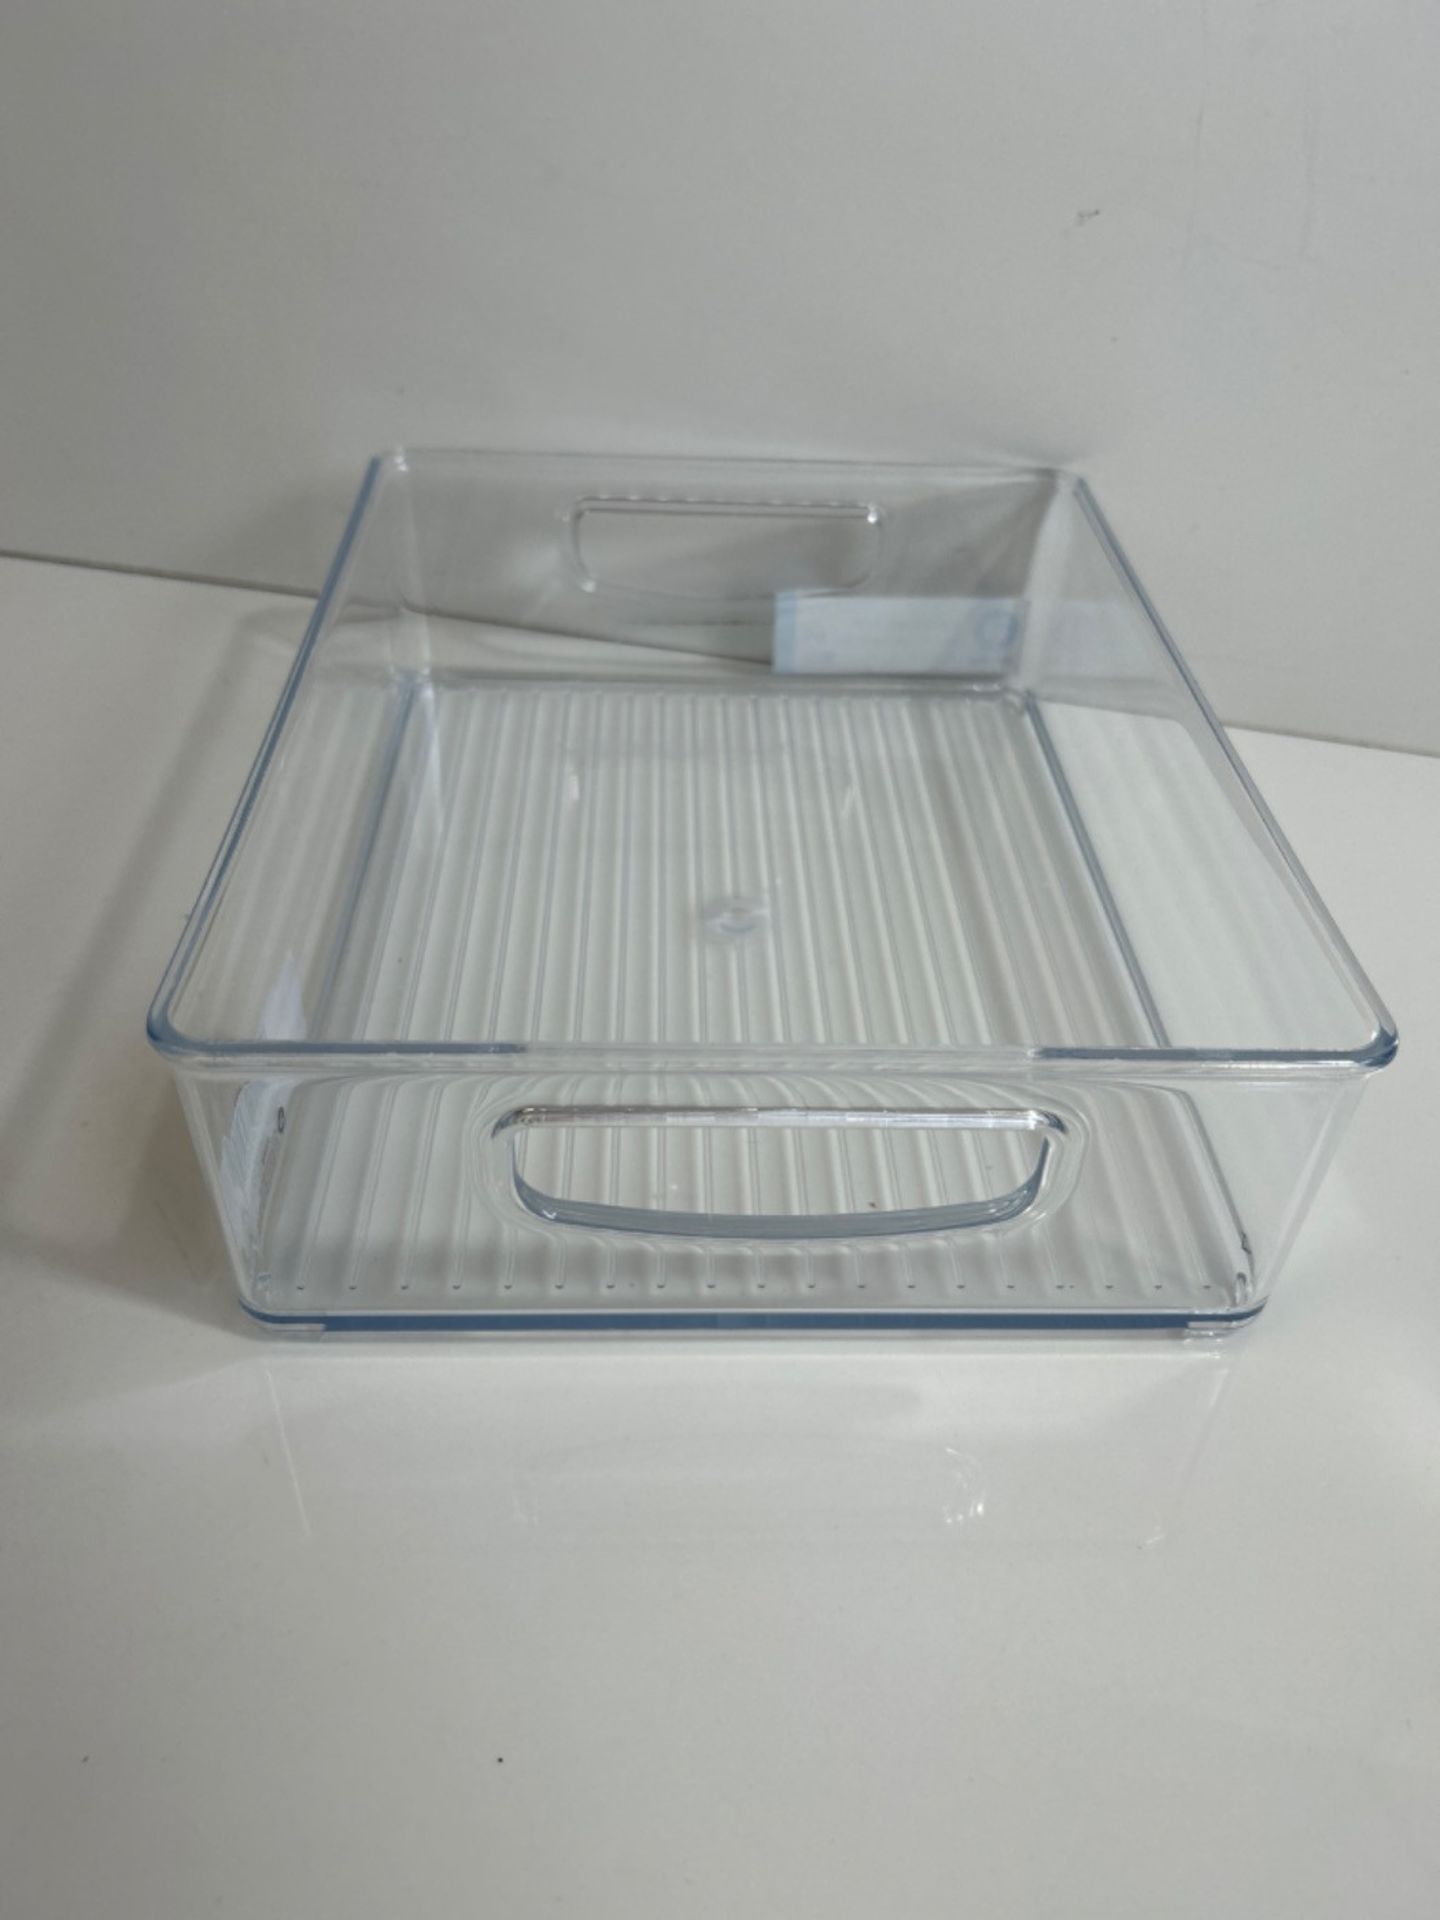 iDesign Fridge Organiser, Stackable Storage Container with Handles, Small BPA-free Clear Drawer Org - Image 3 of 3